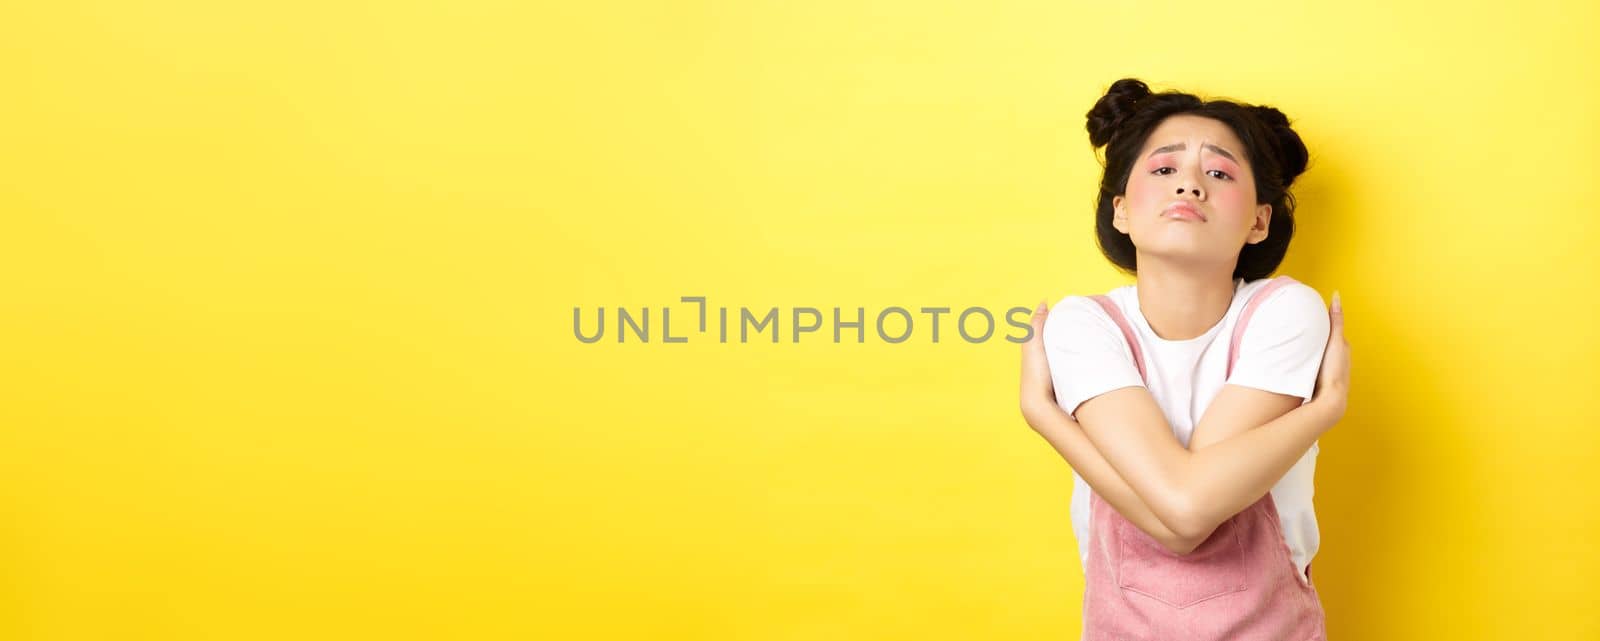 Lonely sad teen girl hugging herself, wanting to relationship and cuddles, standing alone on yellow background.